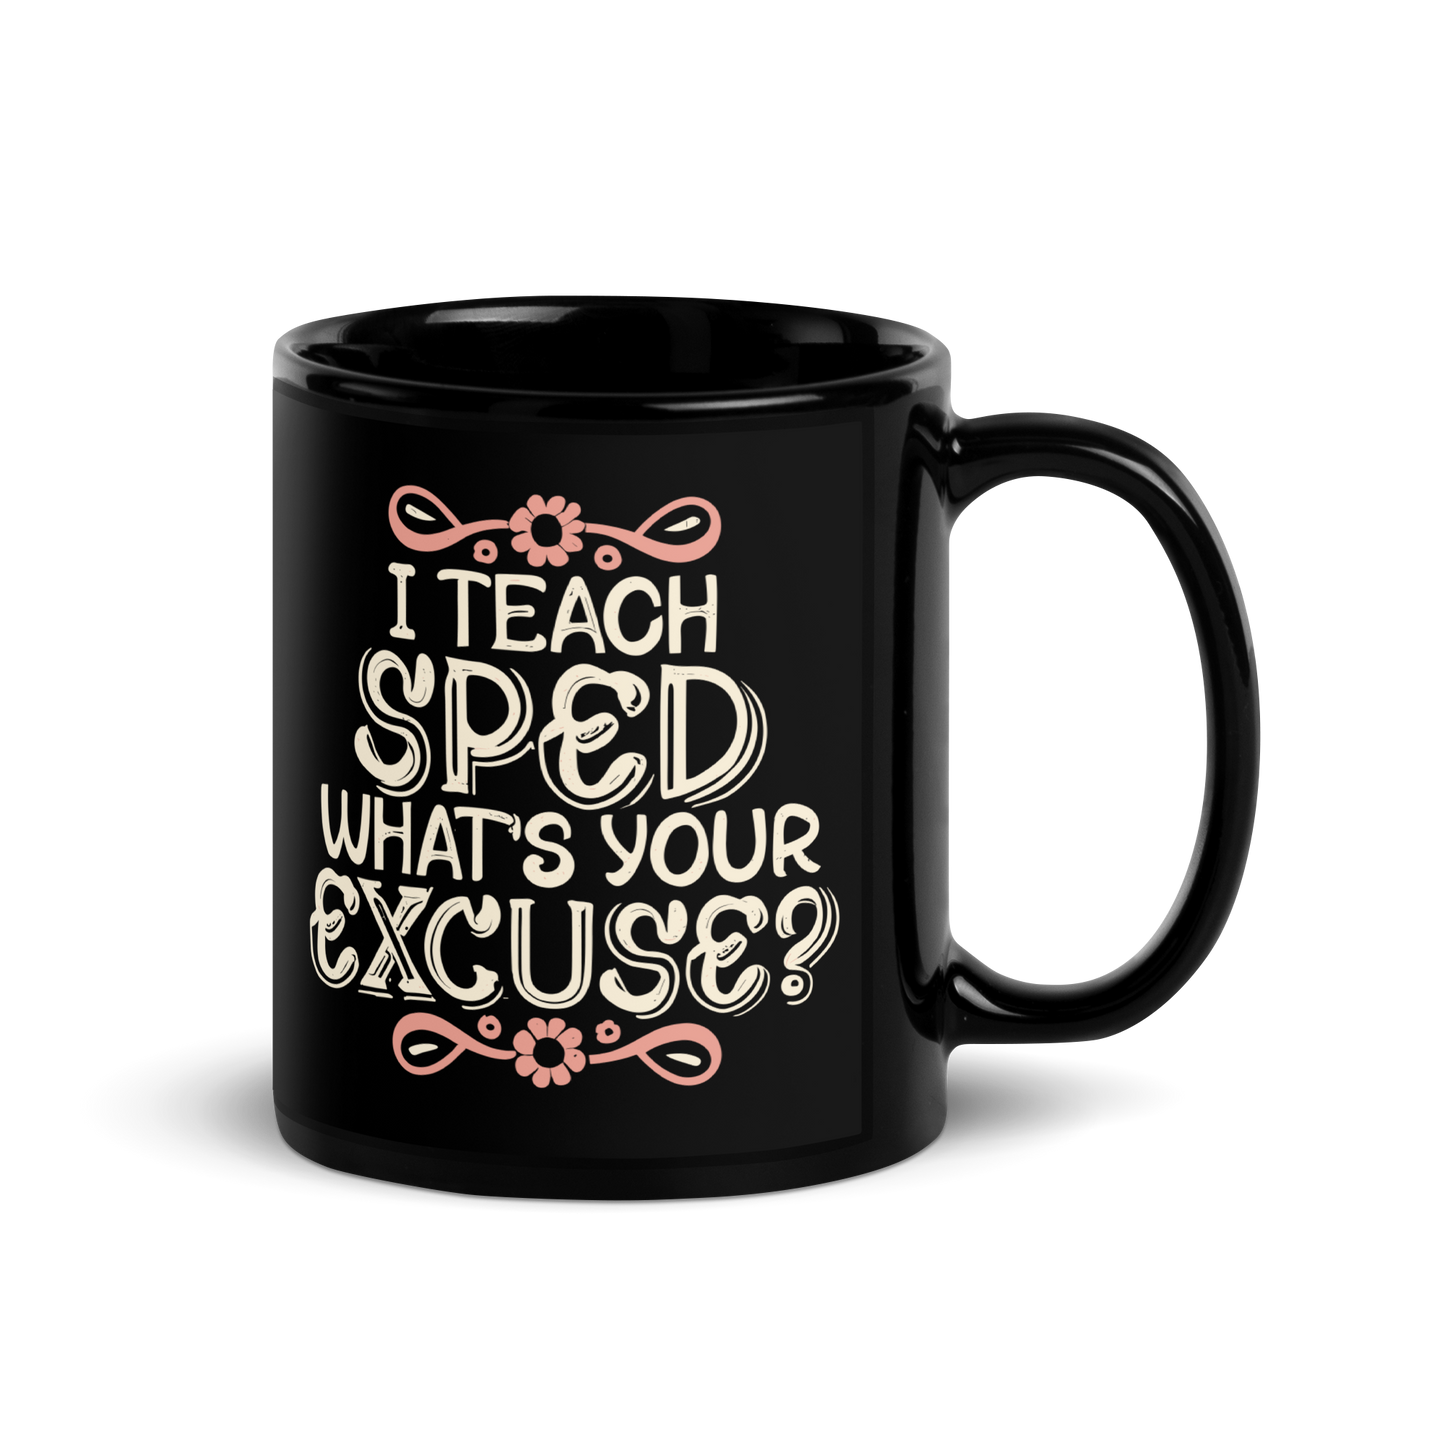 Special Ed Teacher Coffee Mug - "I Teach SPED What's Your Excuse"